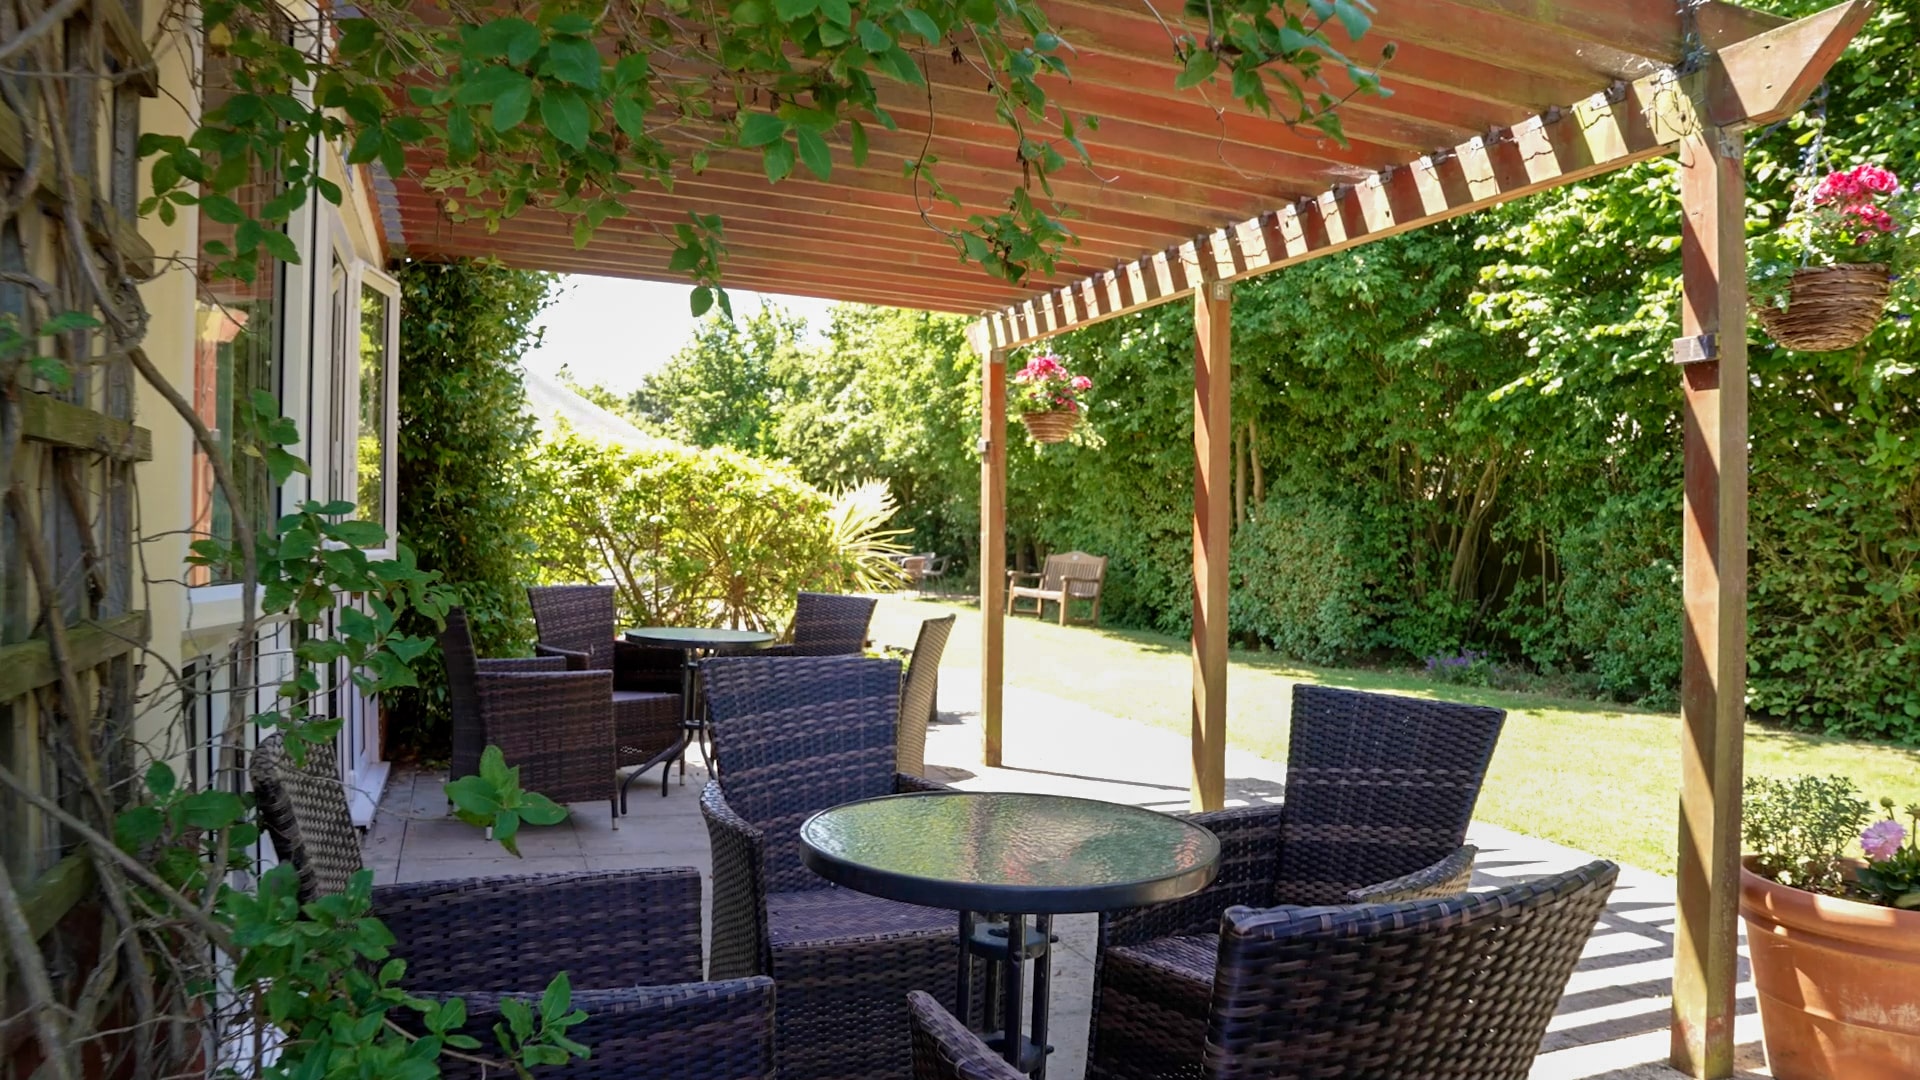 A shady seating area under the pergola and the garden at Lily House Care Home in Ely.